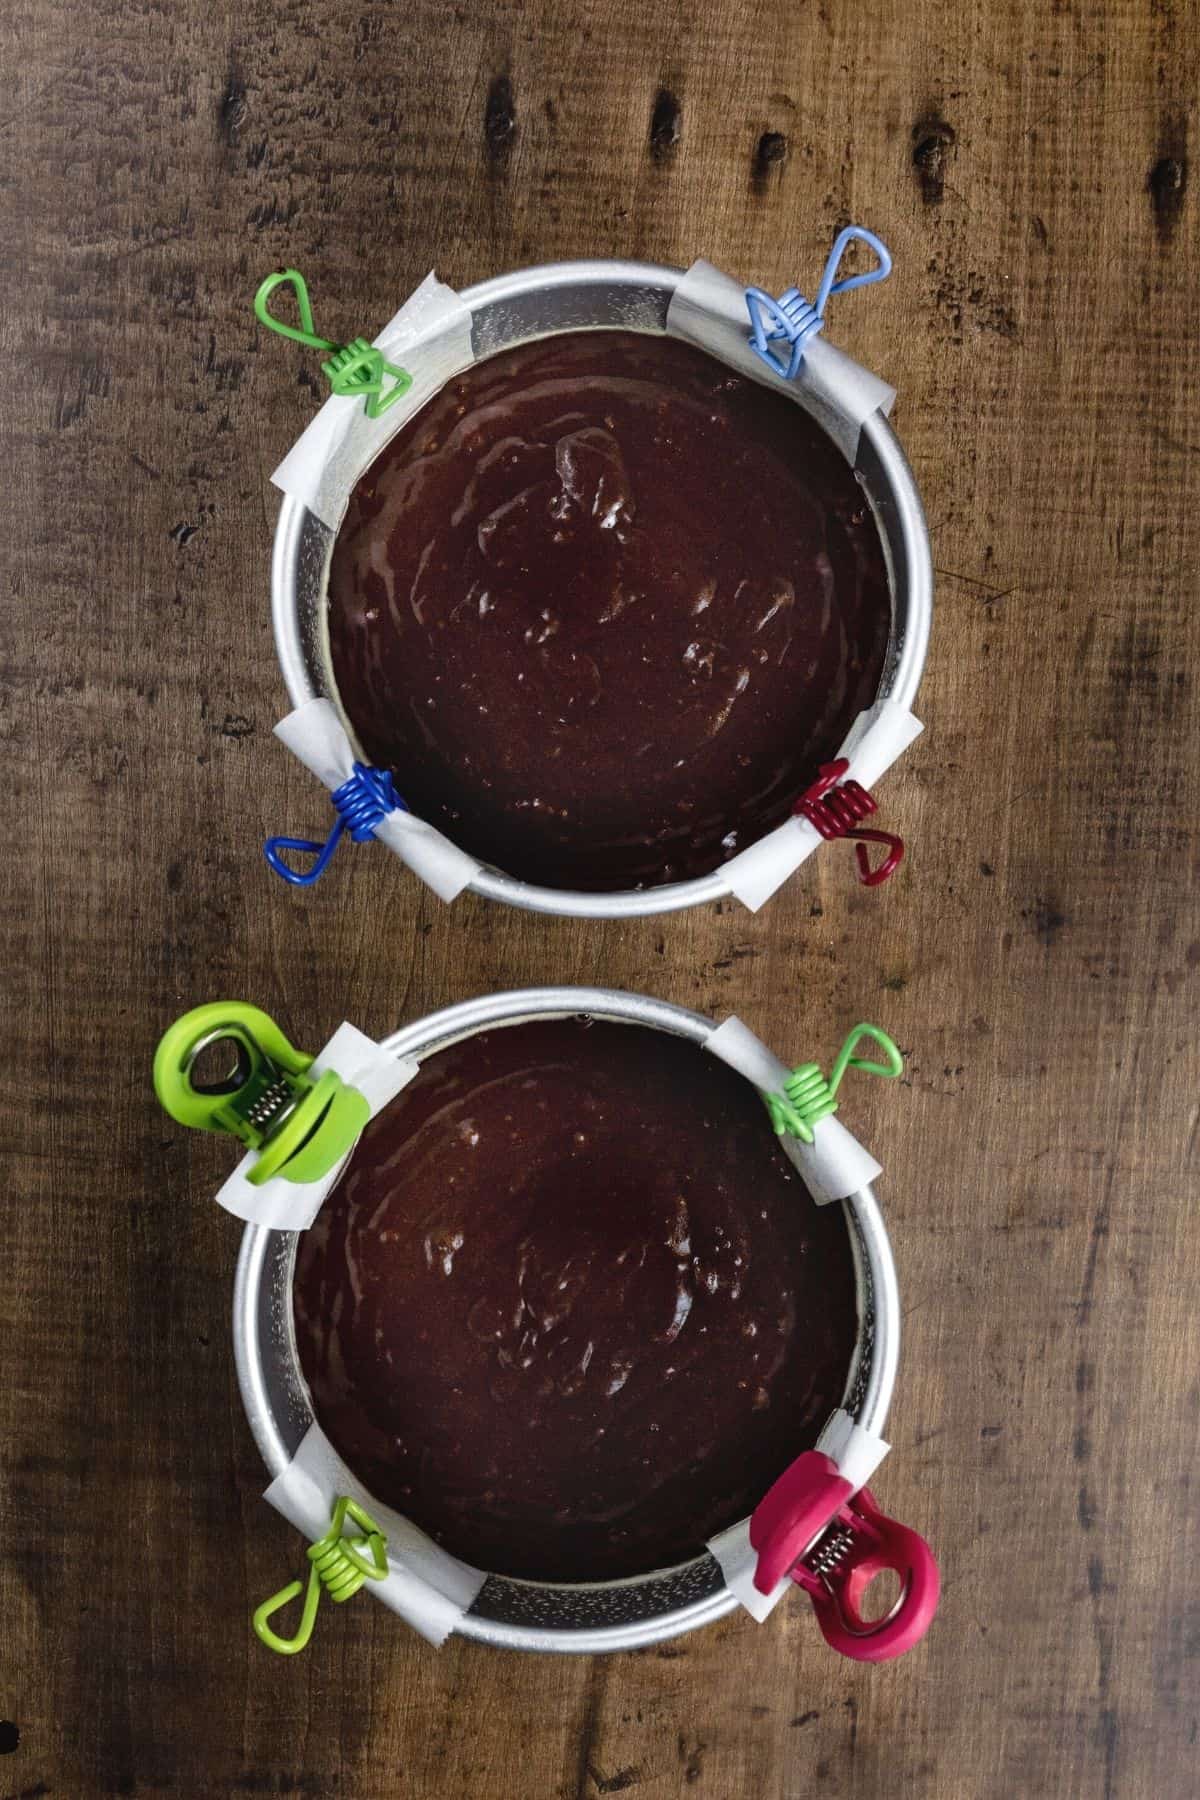 Two 6-inch cake pans lined with parchment and filled with raw cake batter. Little clips have been added to help hold the parchment in place.